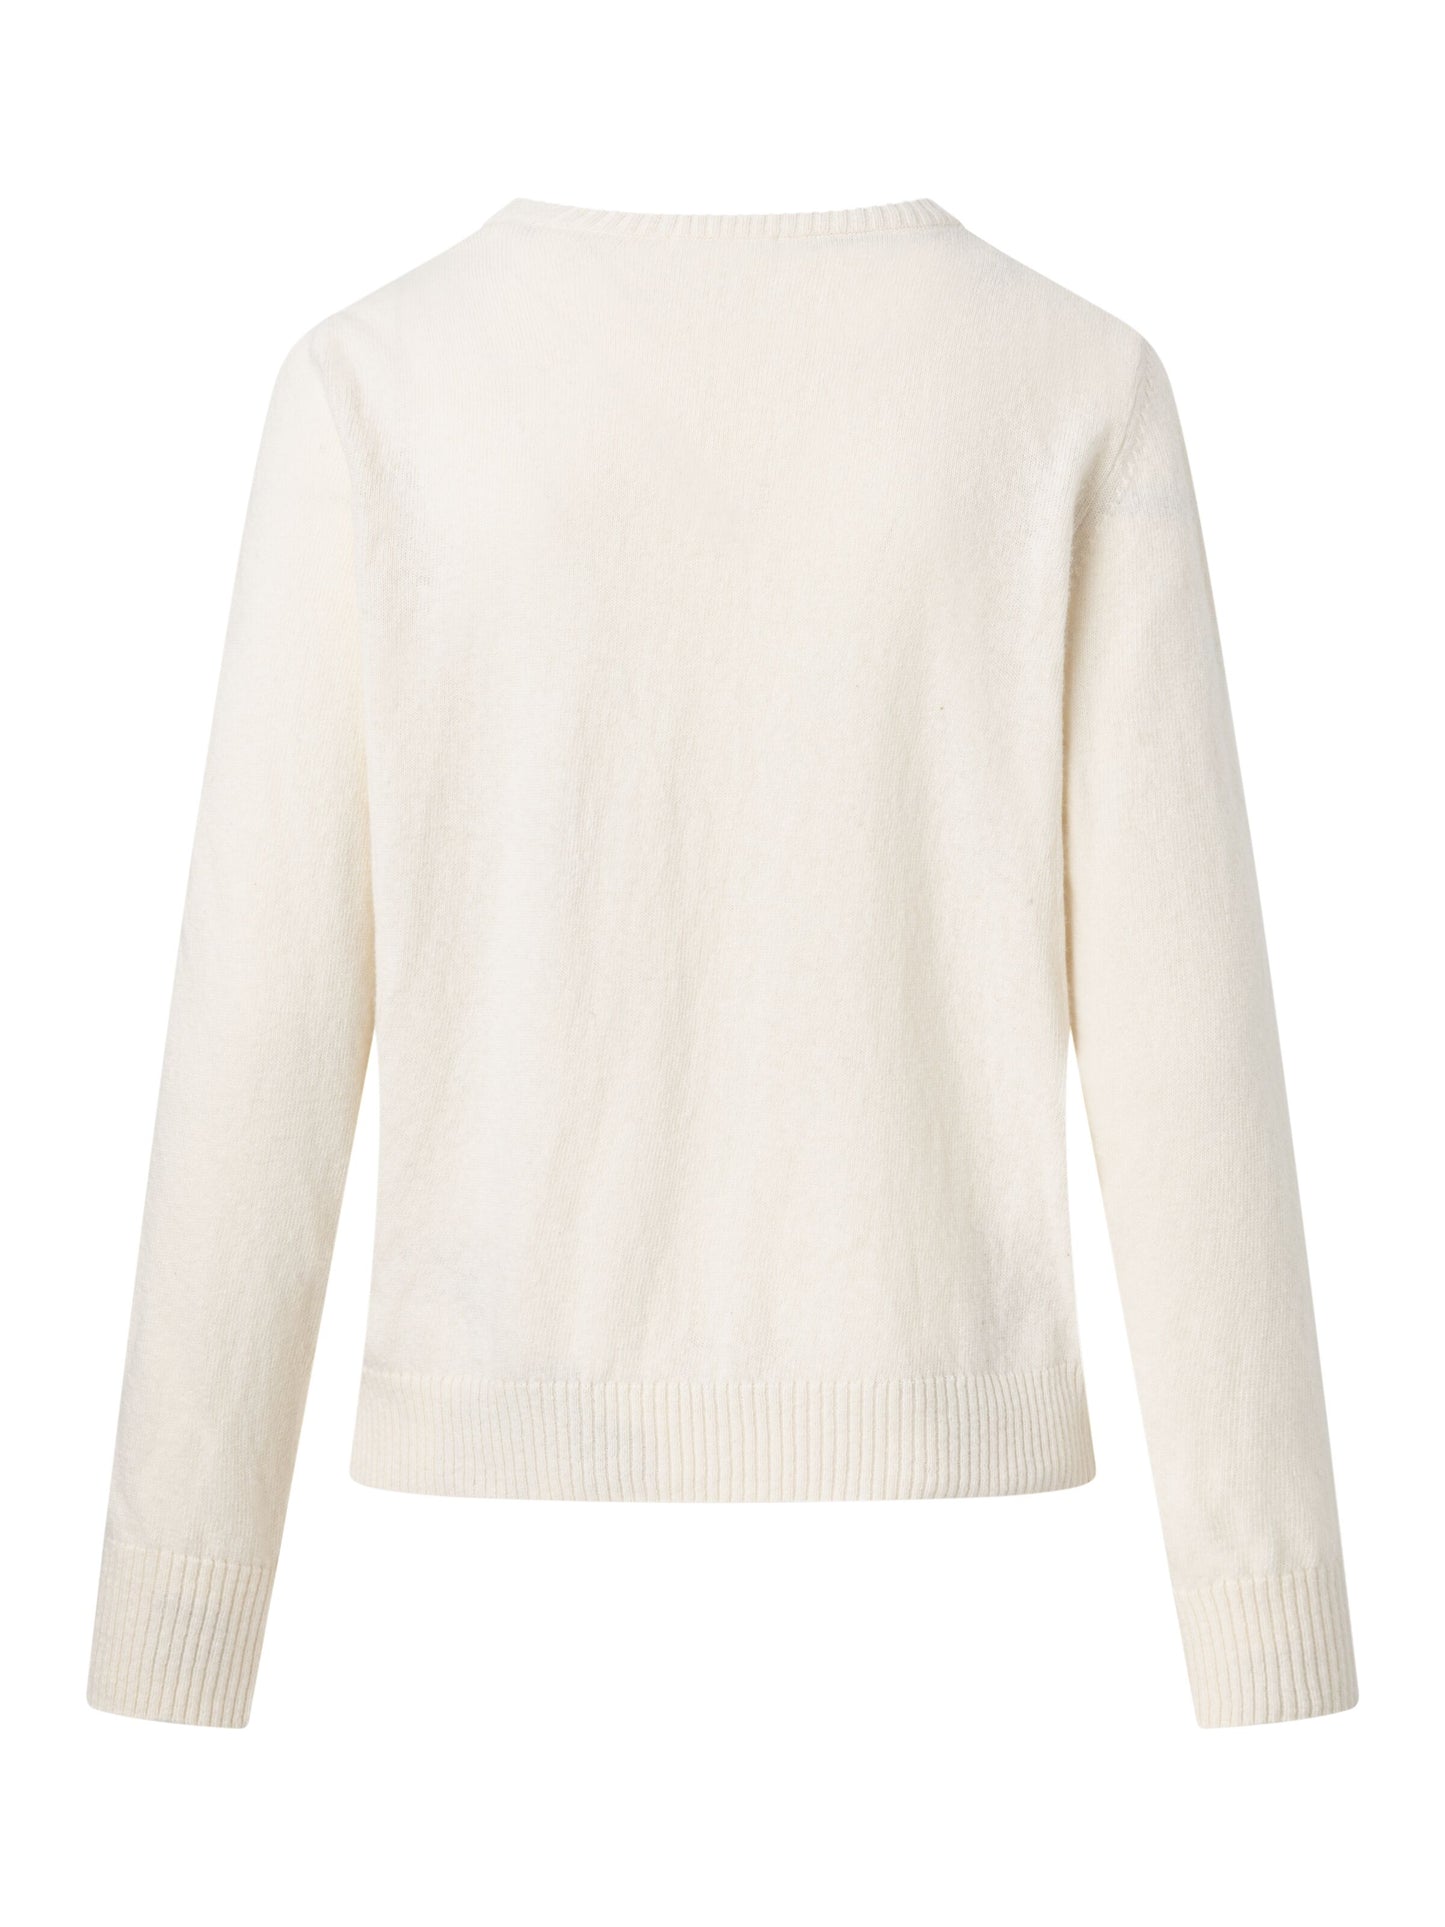 Pullover Lambswool crew neck - Buttercream - KnowledgeCotton